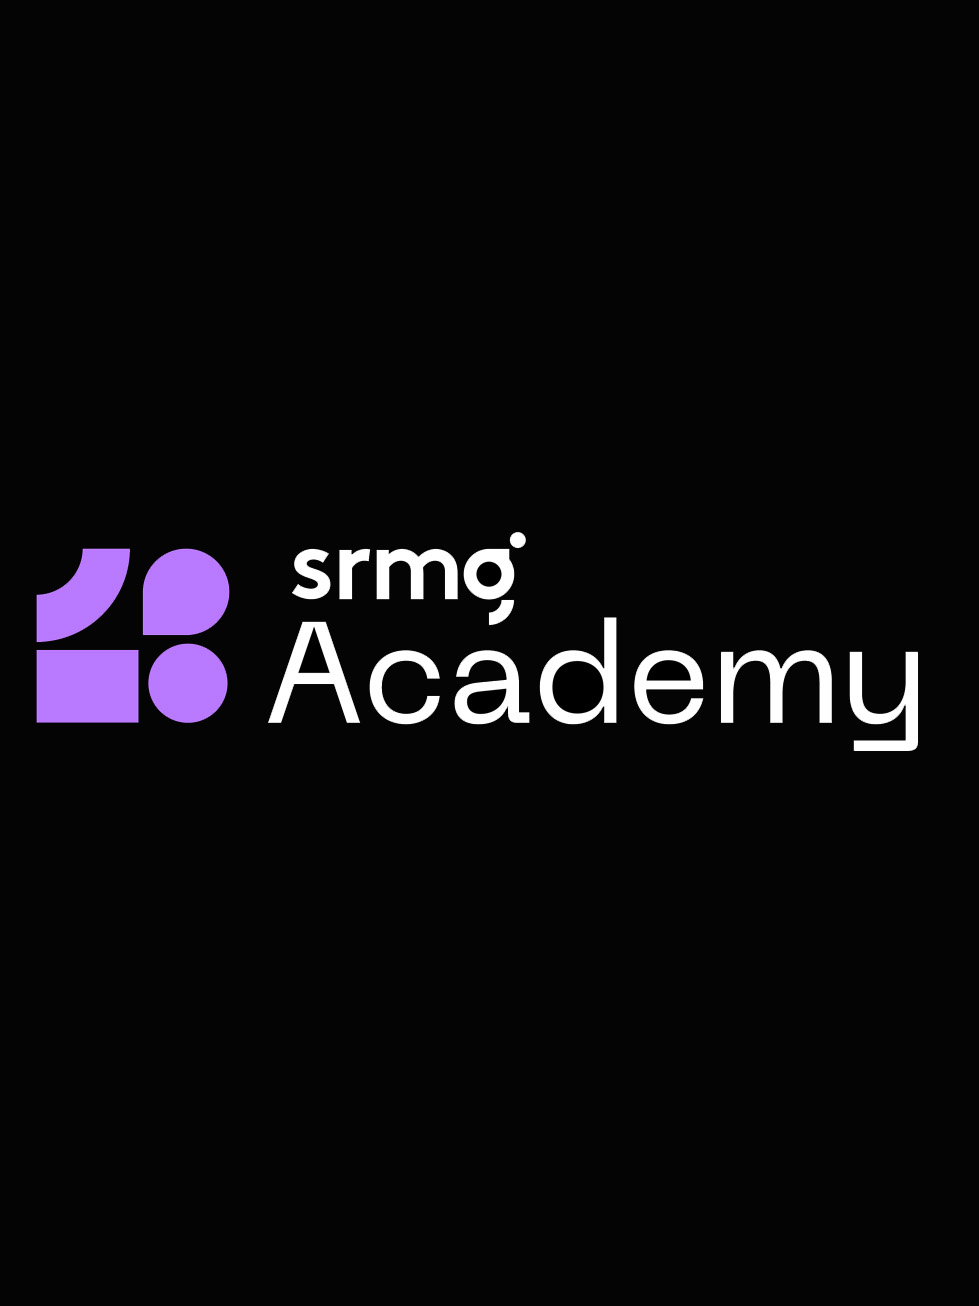 SRMG Academy Launches to Nurture Emerging Media Talent